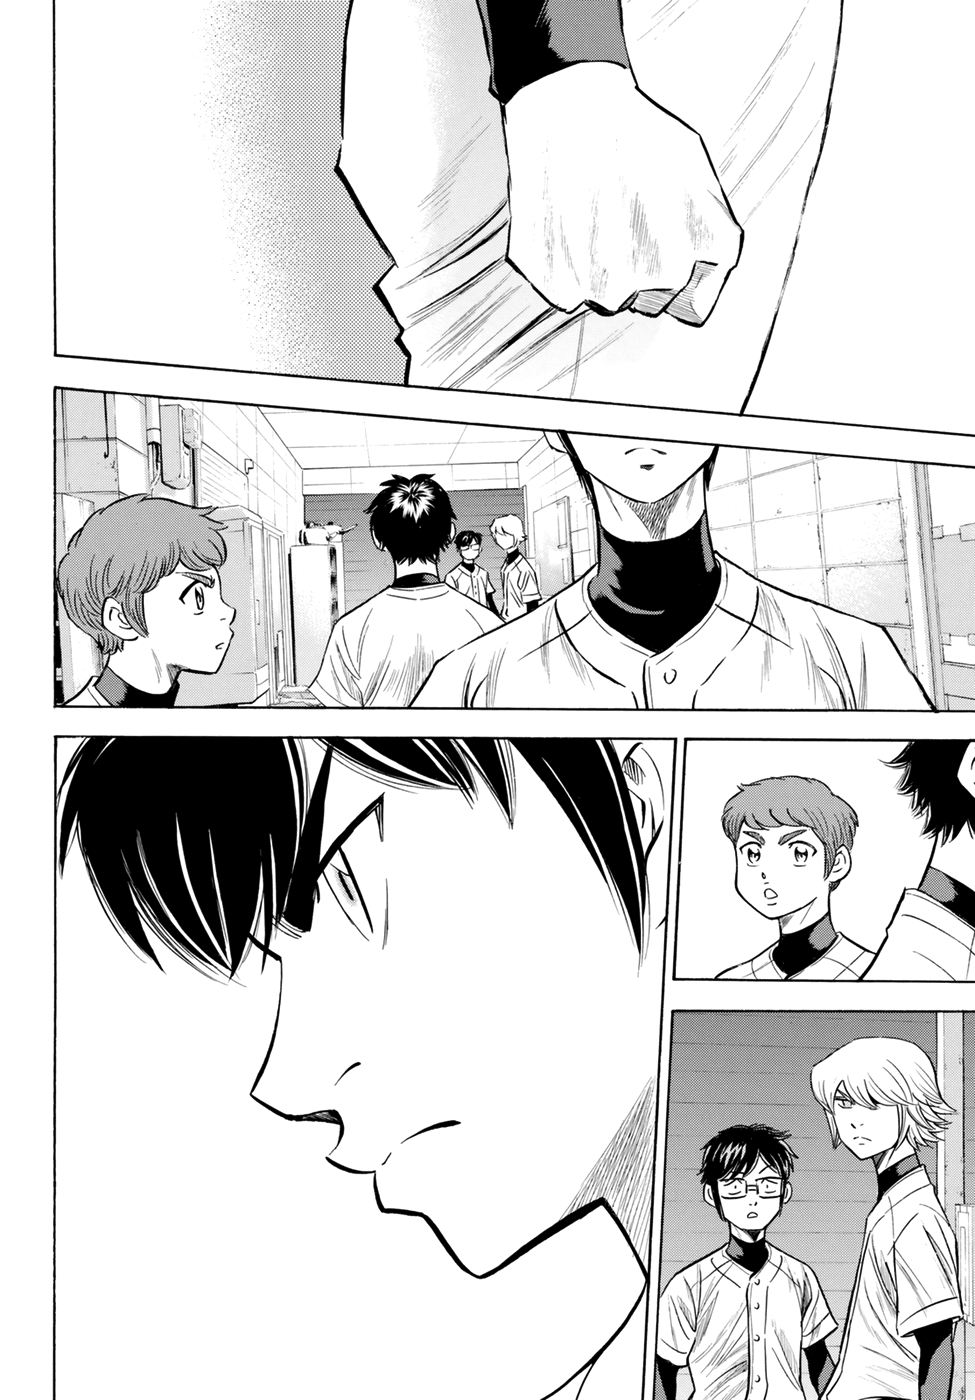 Diamond no Ace Act II Vol. 9 Ch. 82 I'm not Stopping